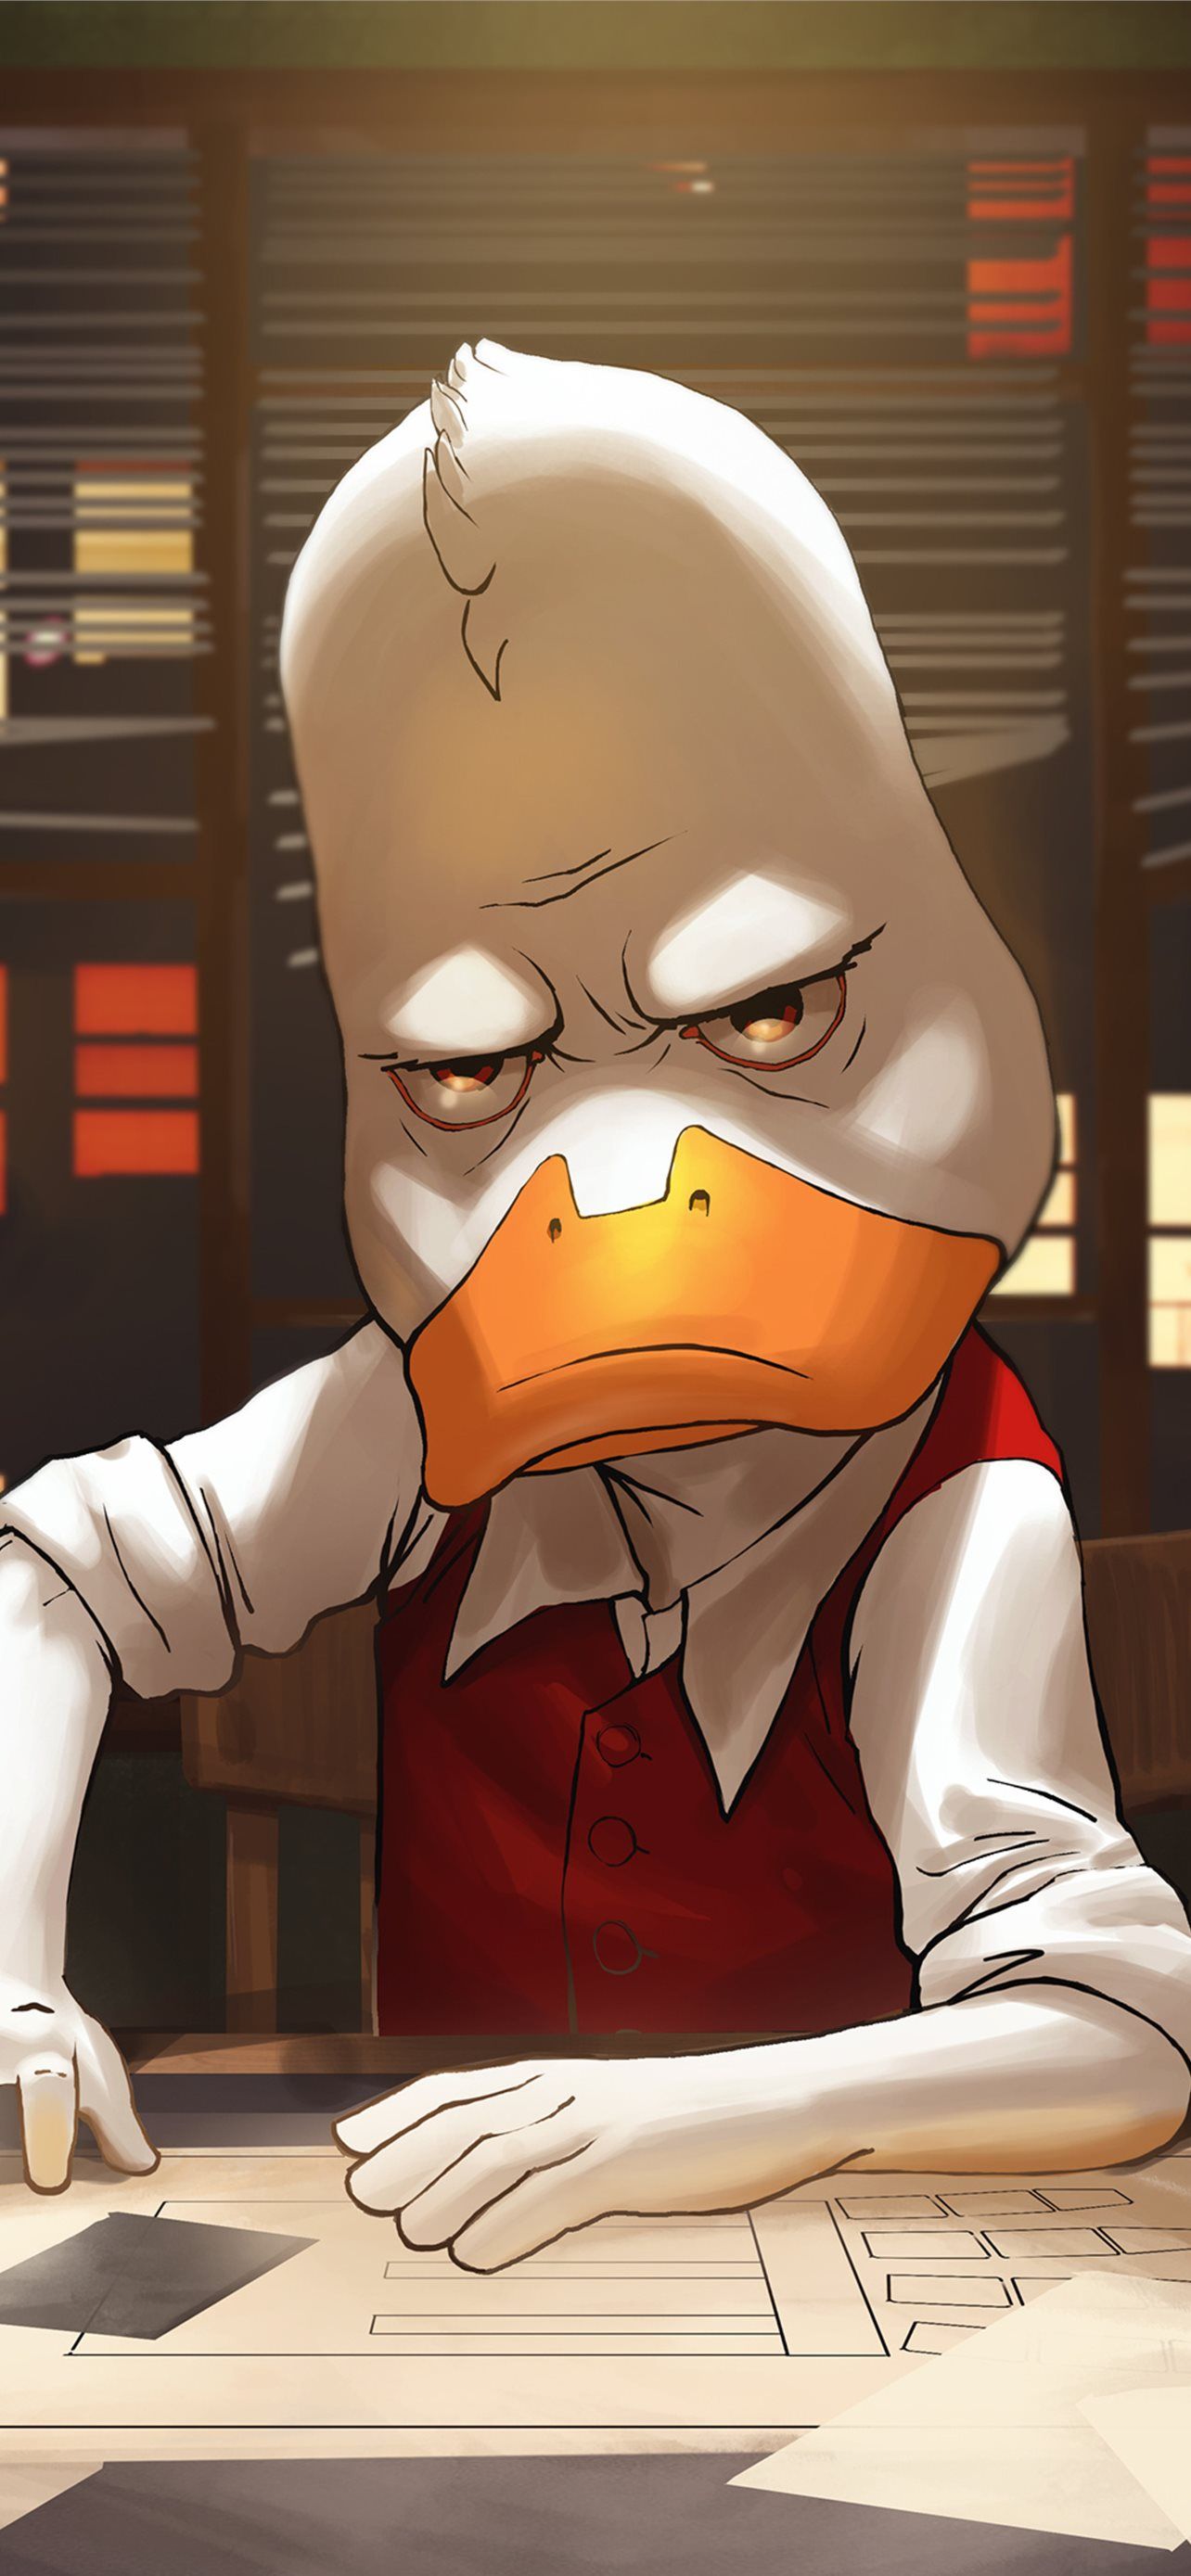 A cartoon duck sitting at table with papers - Duck